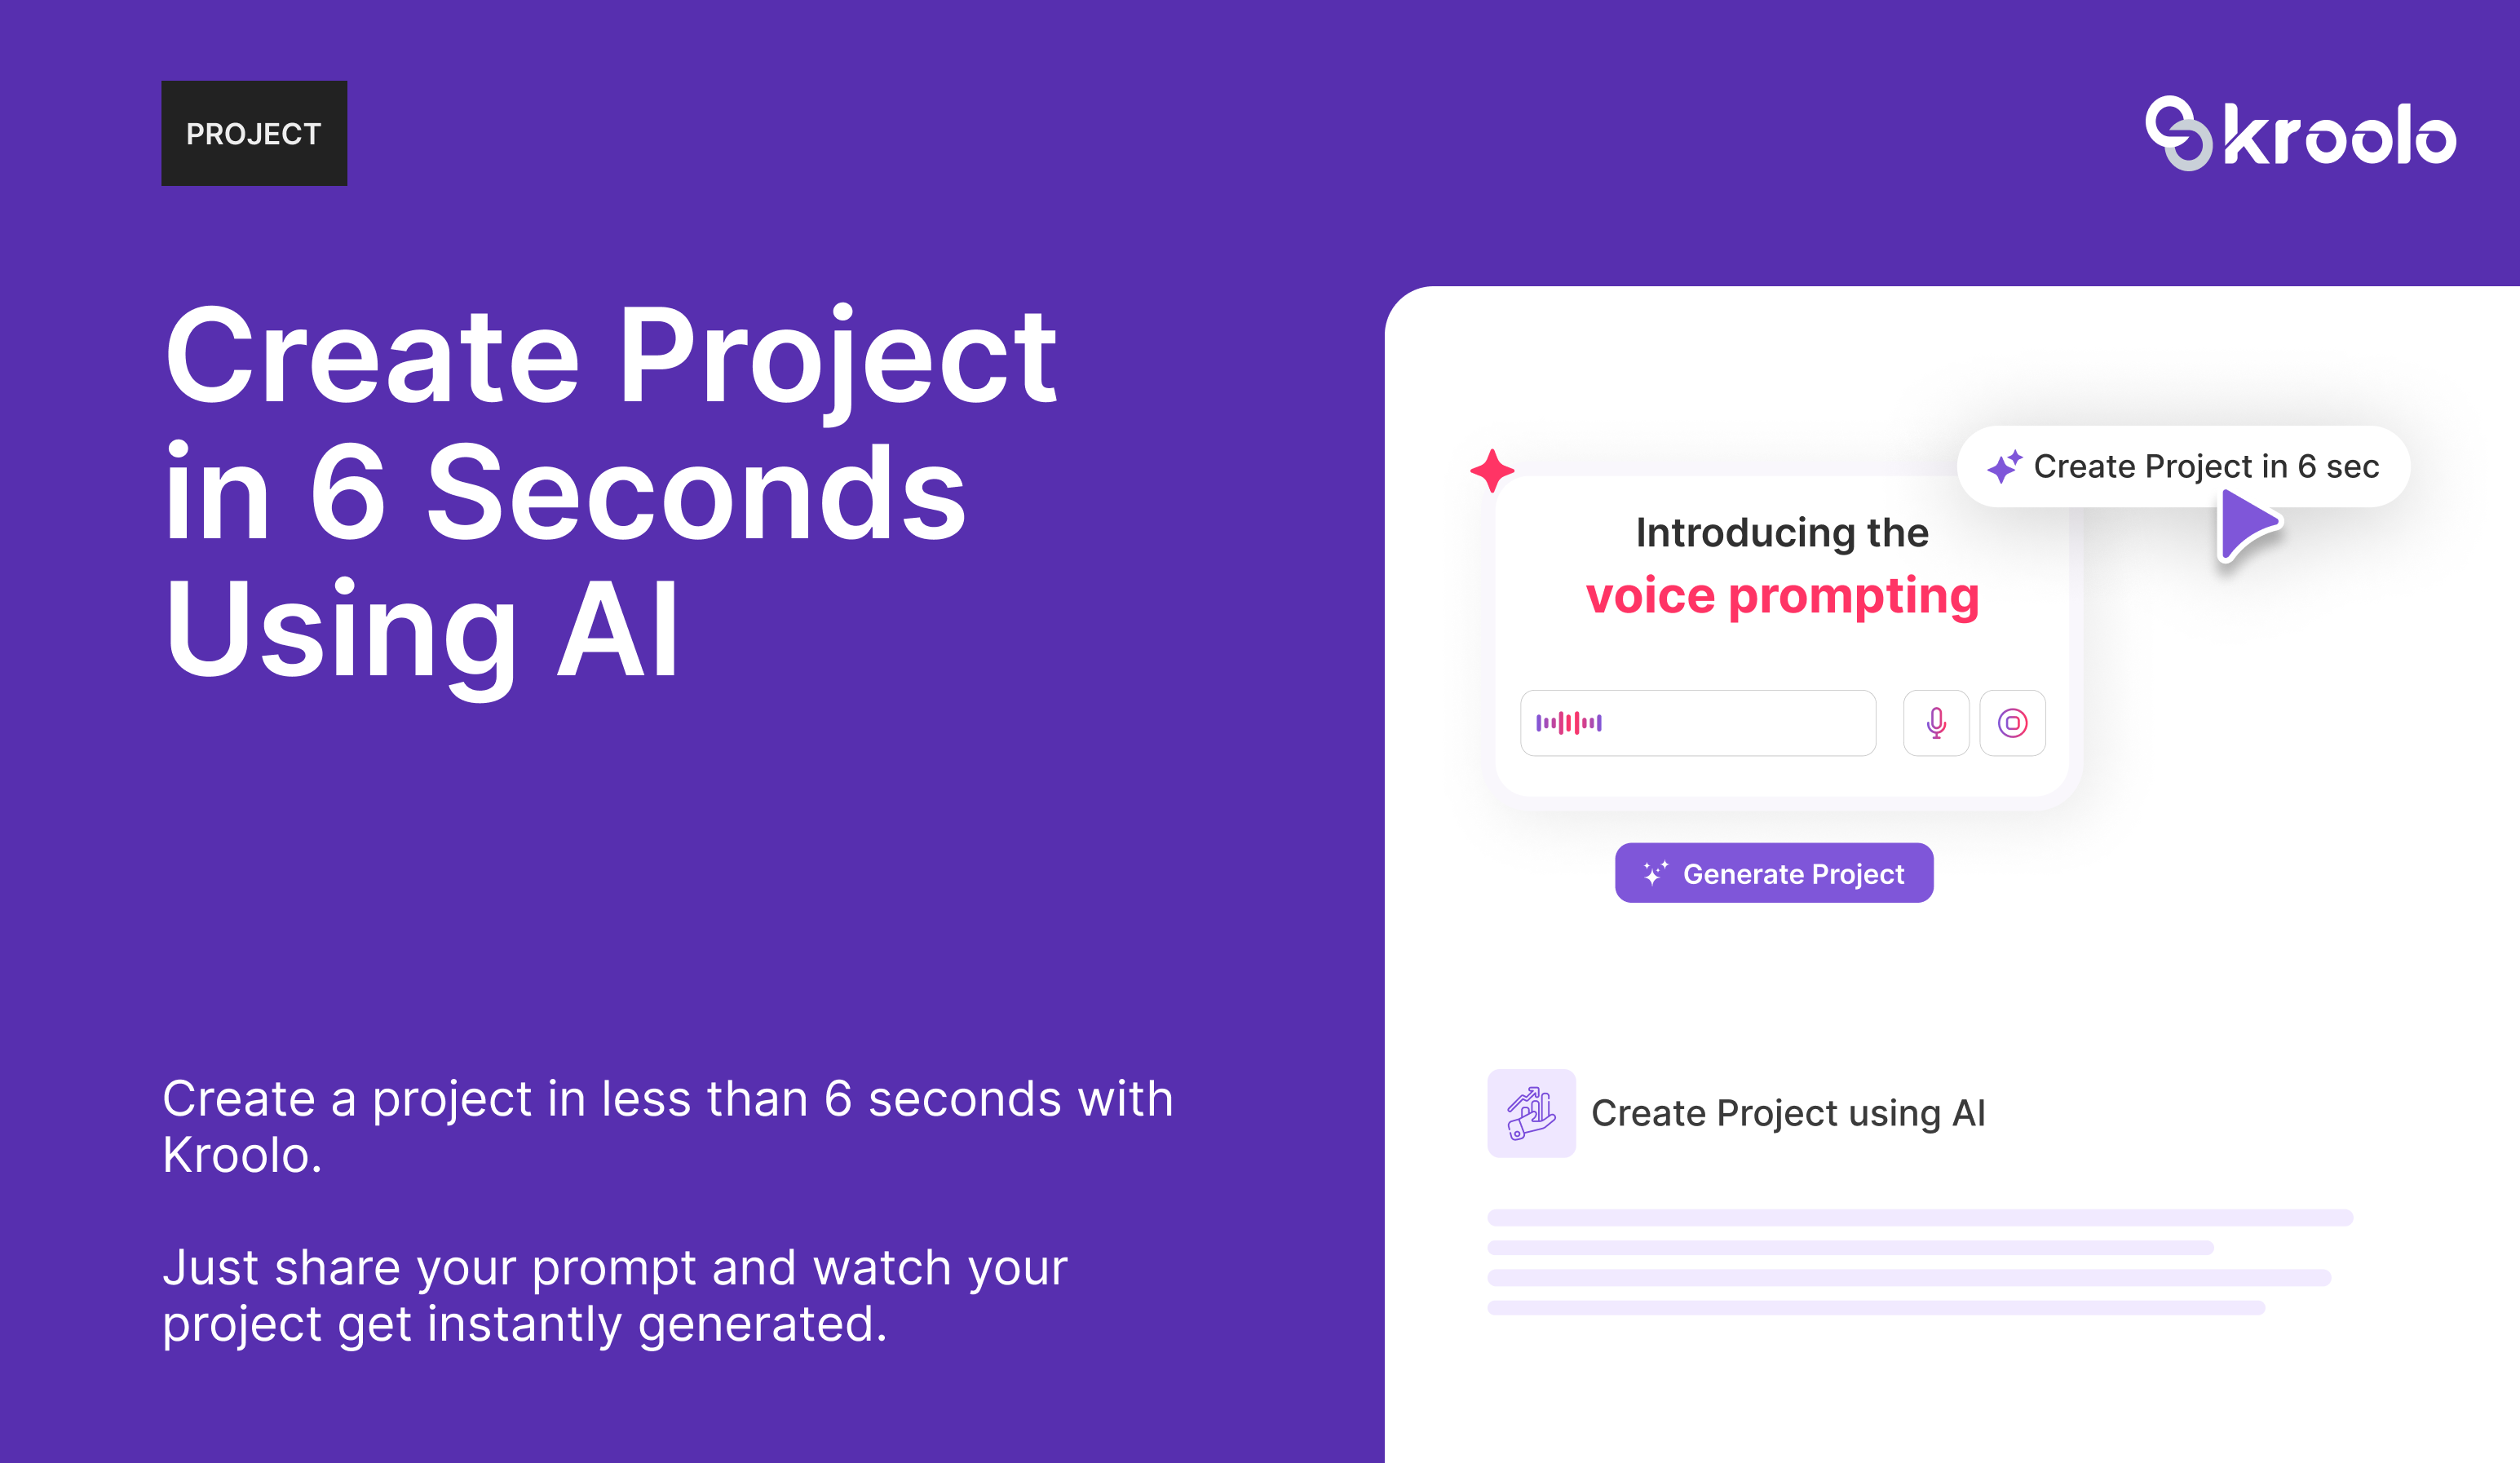 Project creation with AI - Create a project in less than 6 seconds with Kroolo. Just share your prompt and watch your project get instantly generated.